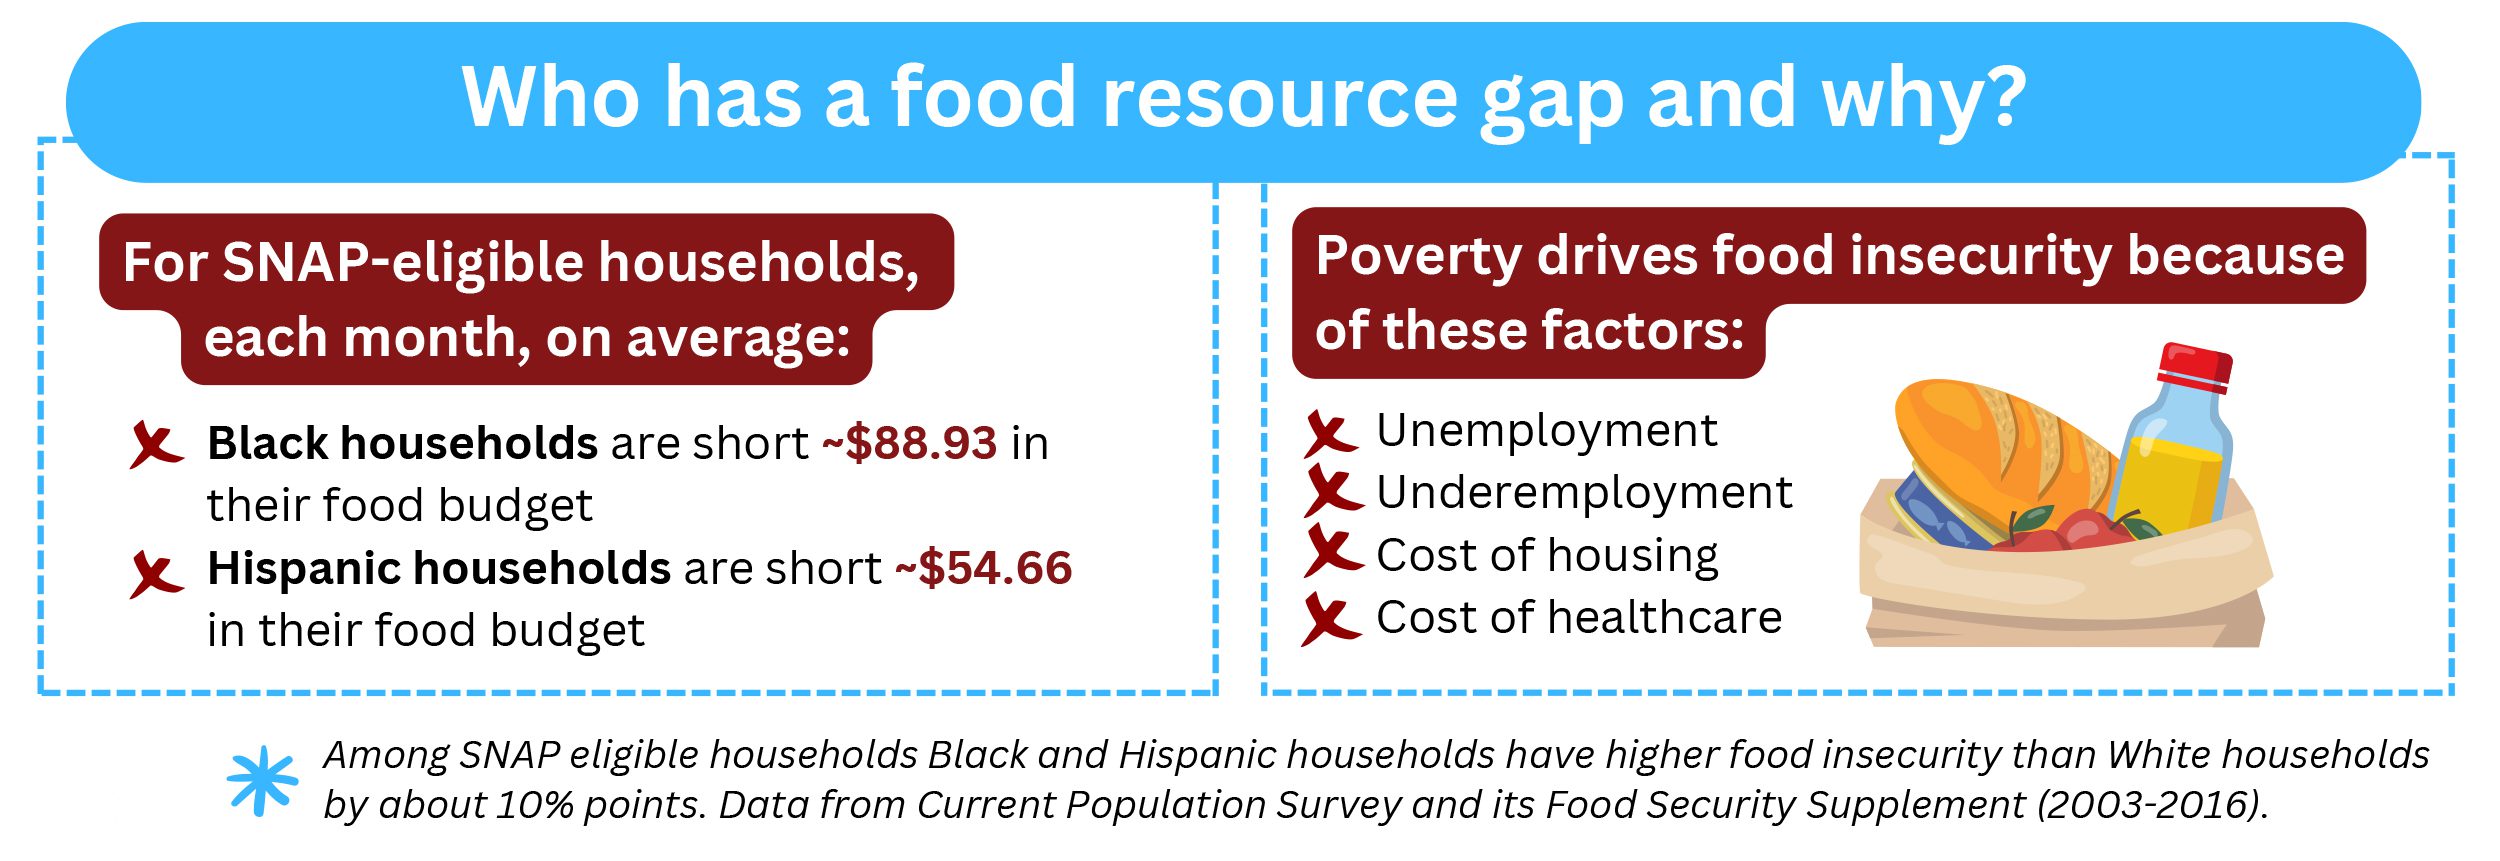 Who has a food resource gap